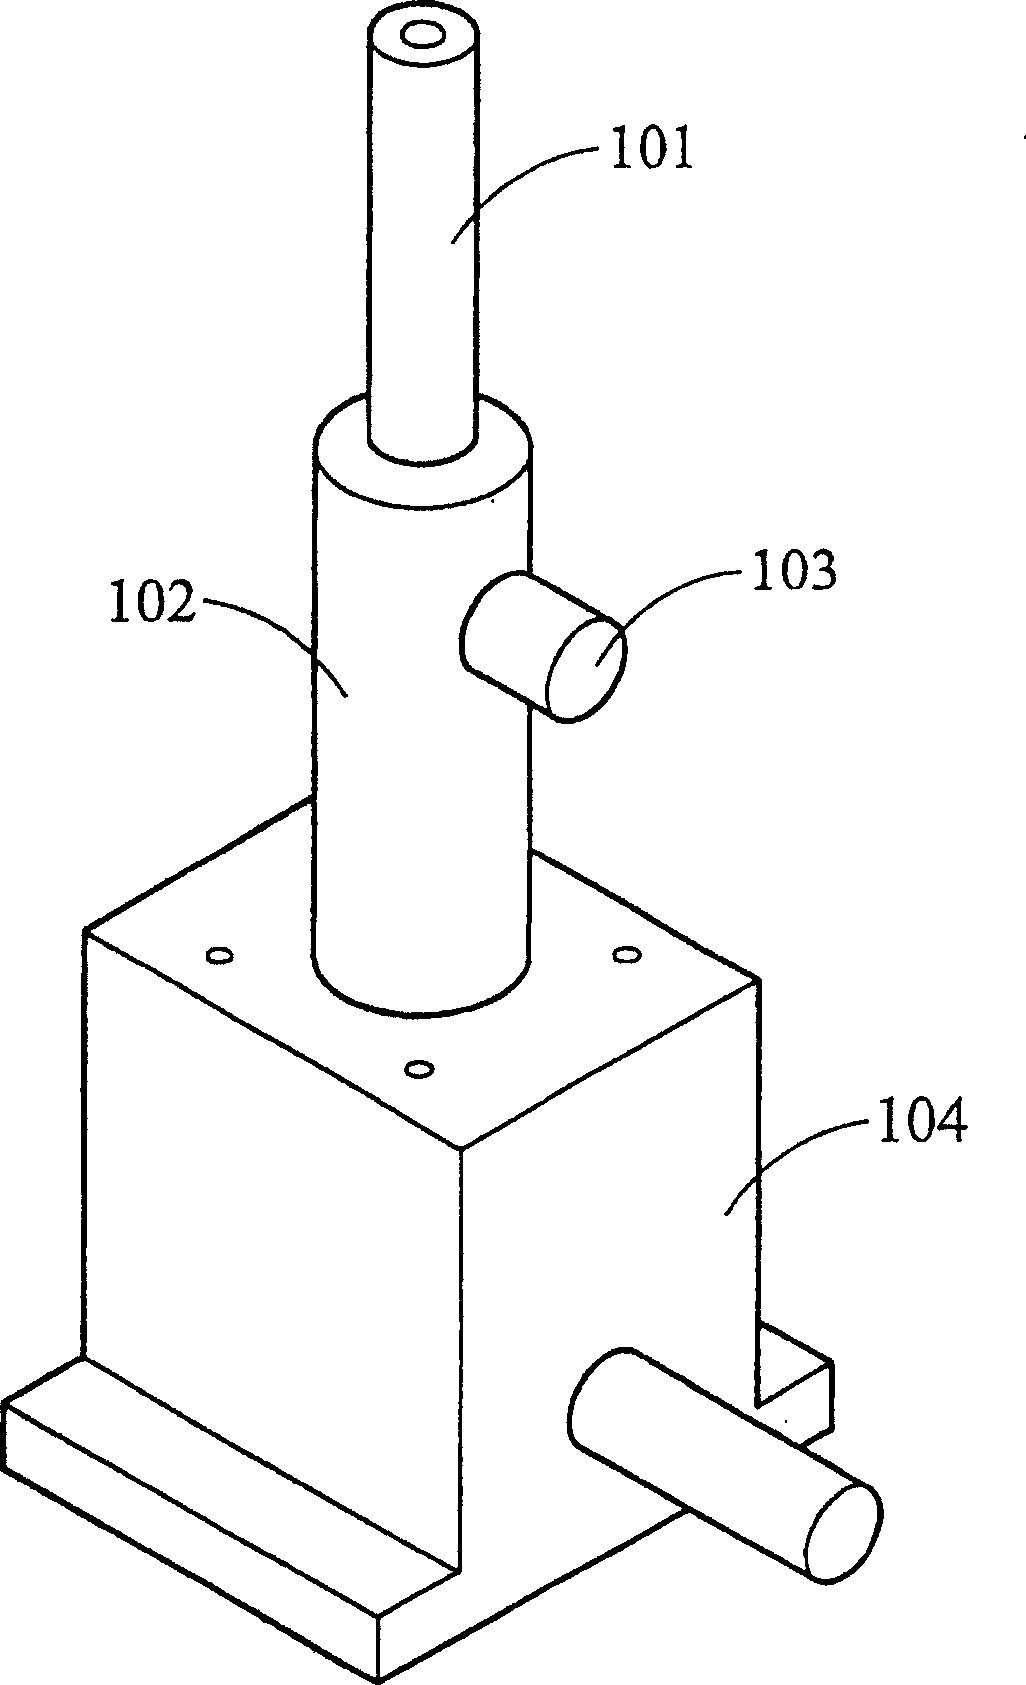 Optical height adjusting device